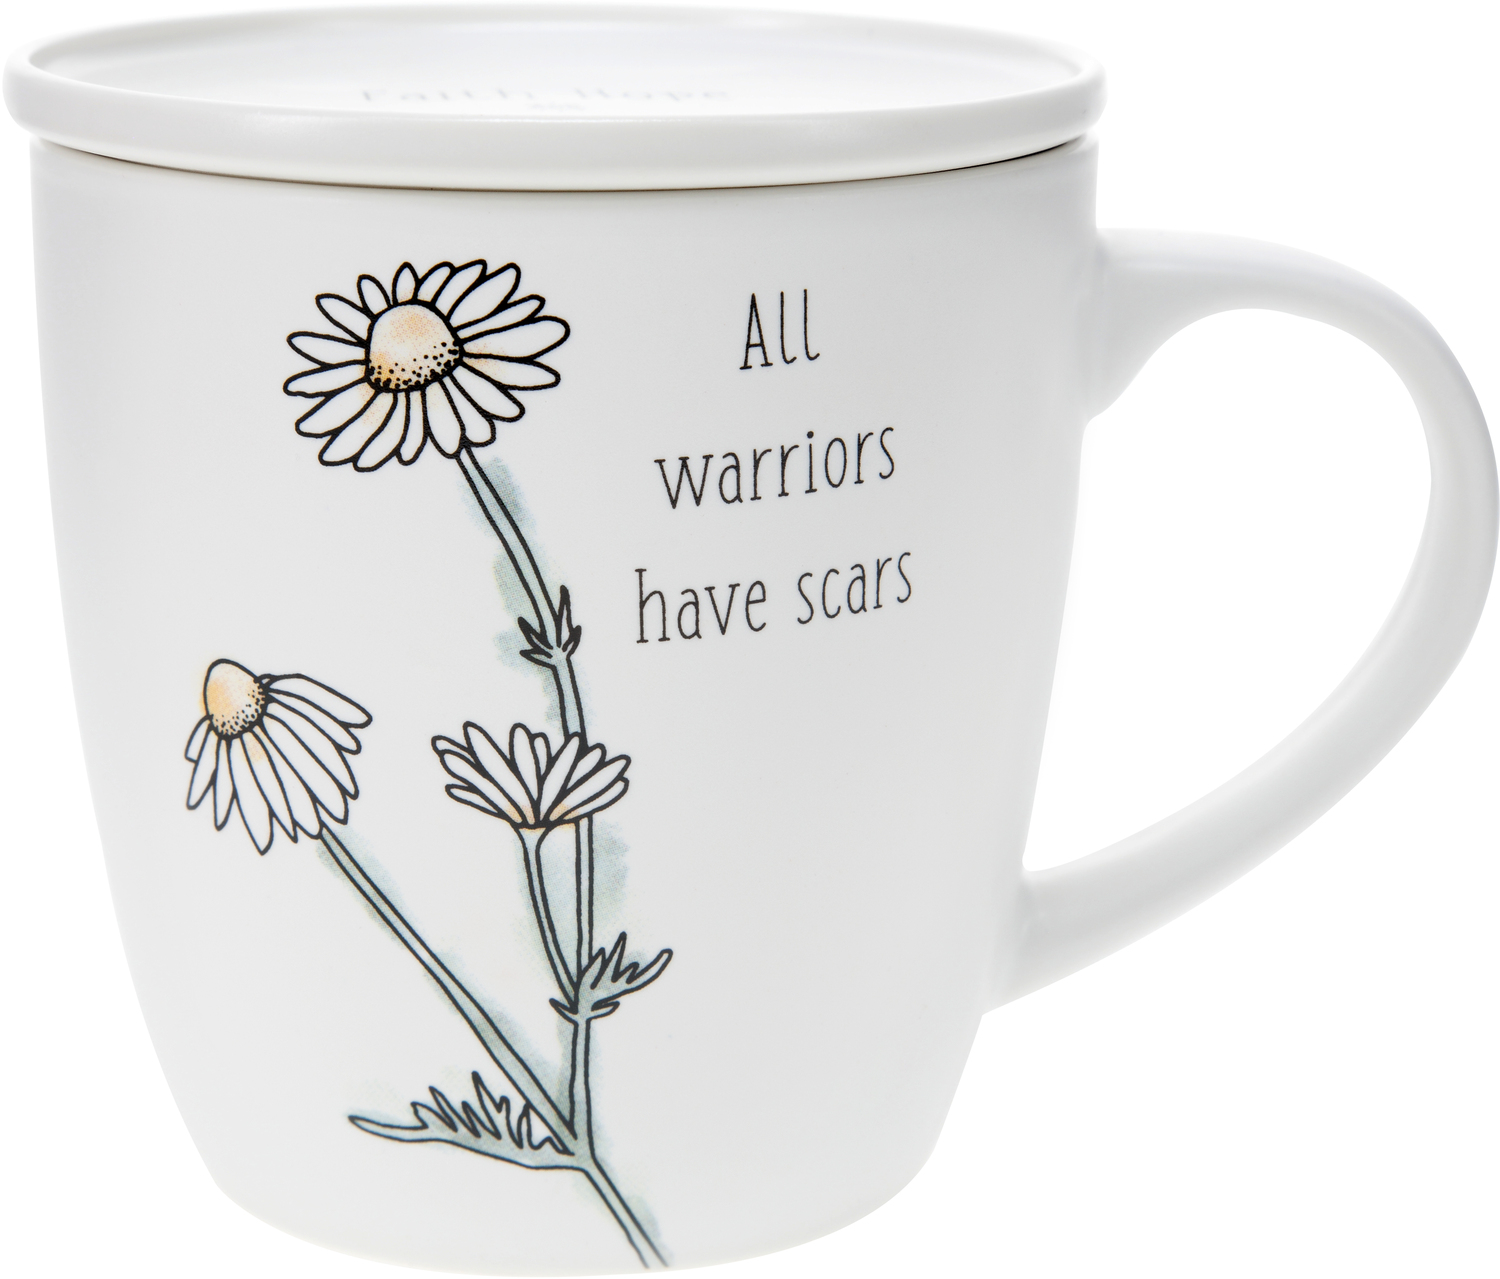 All Warriors by Faith Hope and Healing - All Warriors - 17 oz Cup with Coaster Lid